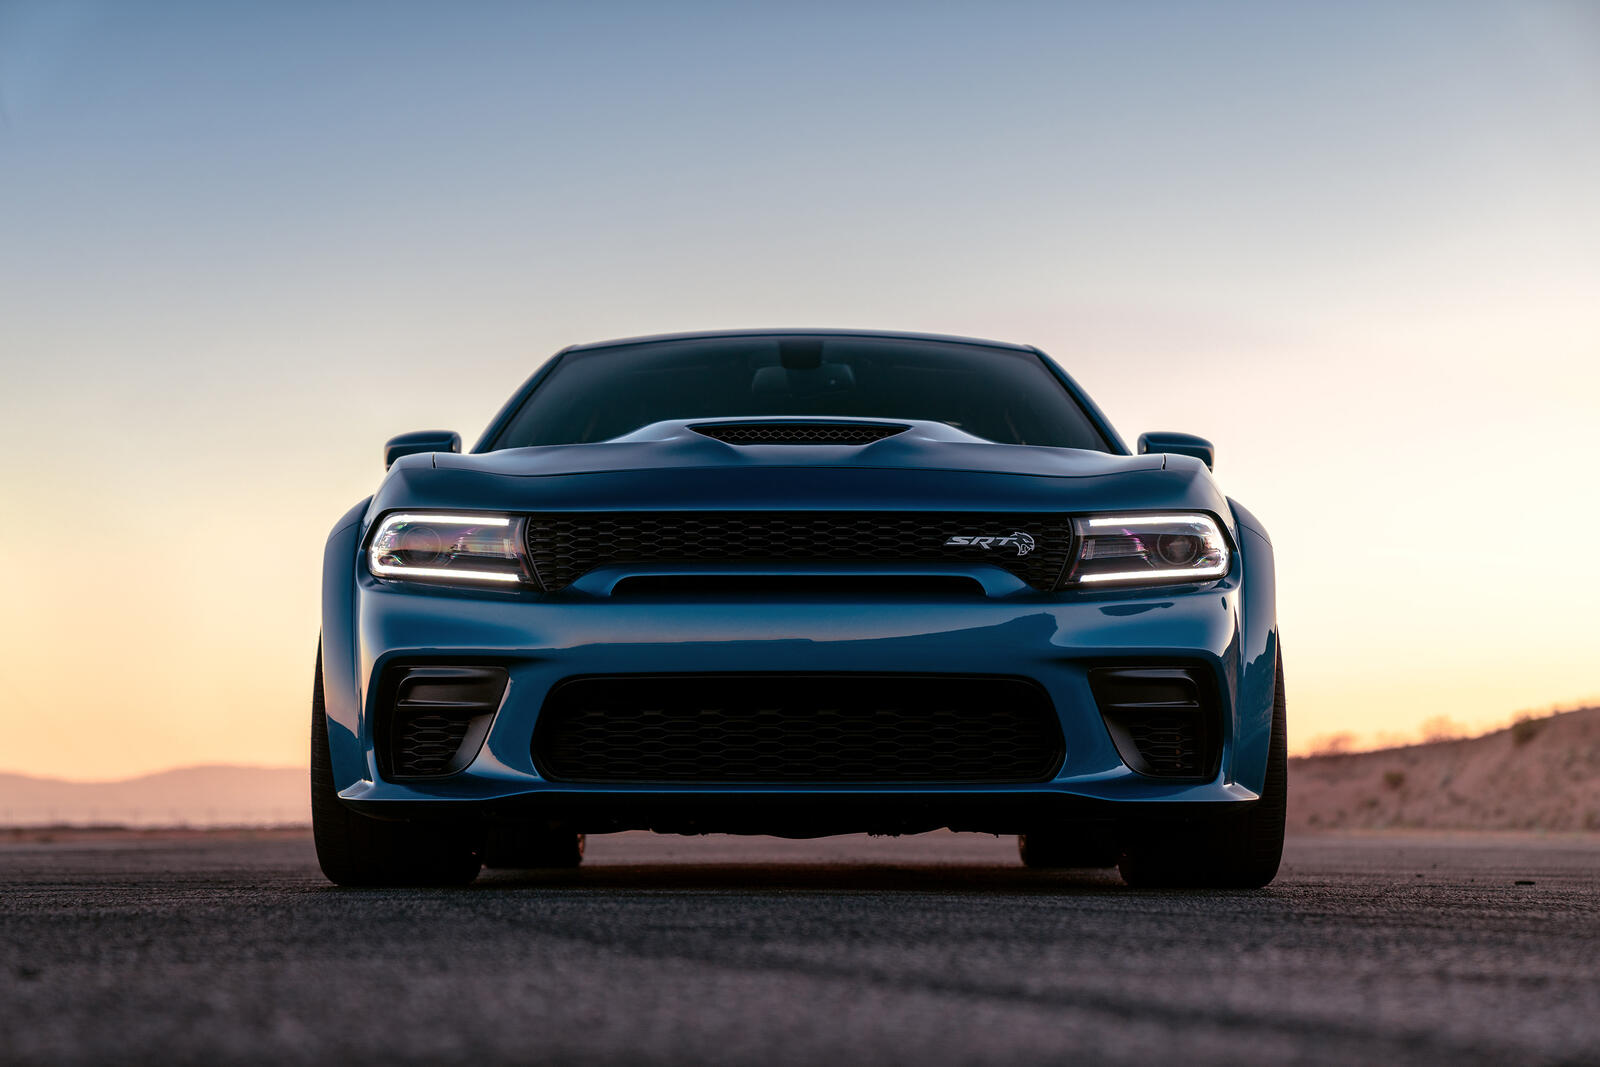 Wallpapers Dodge miscellaneous cars on the desktop